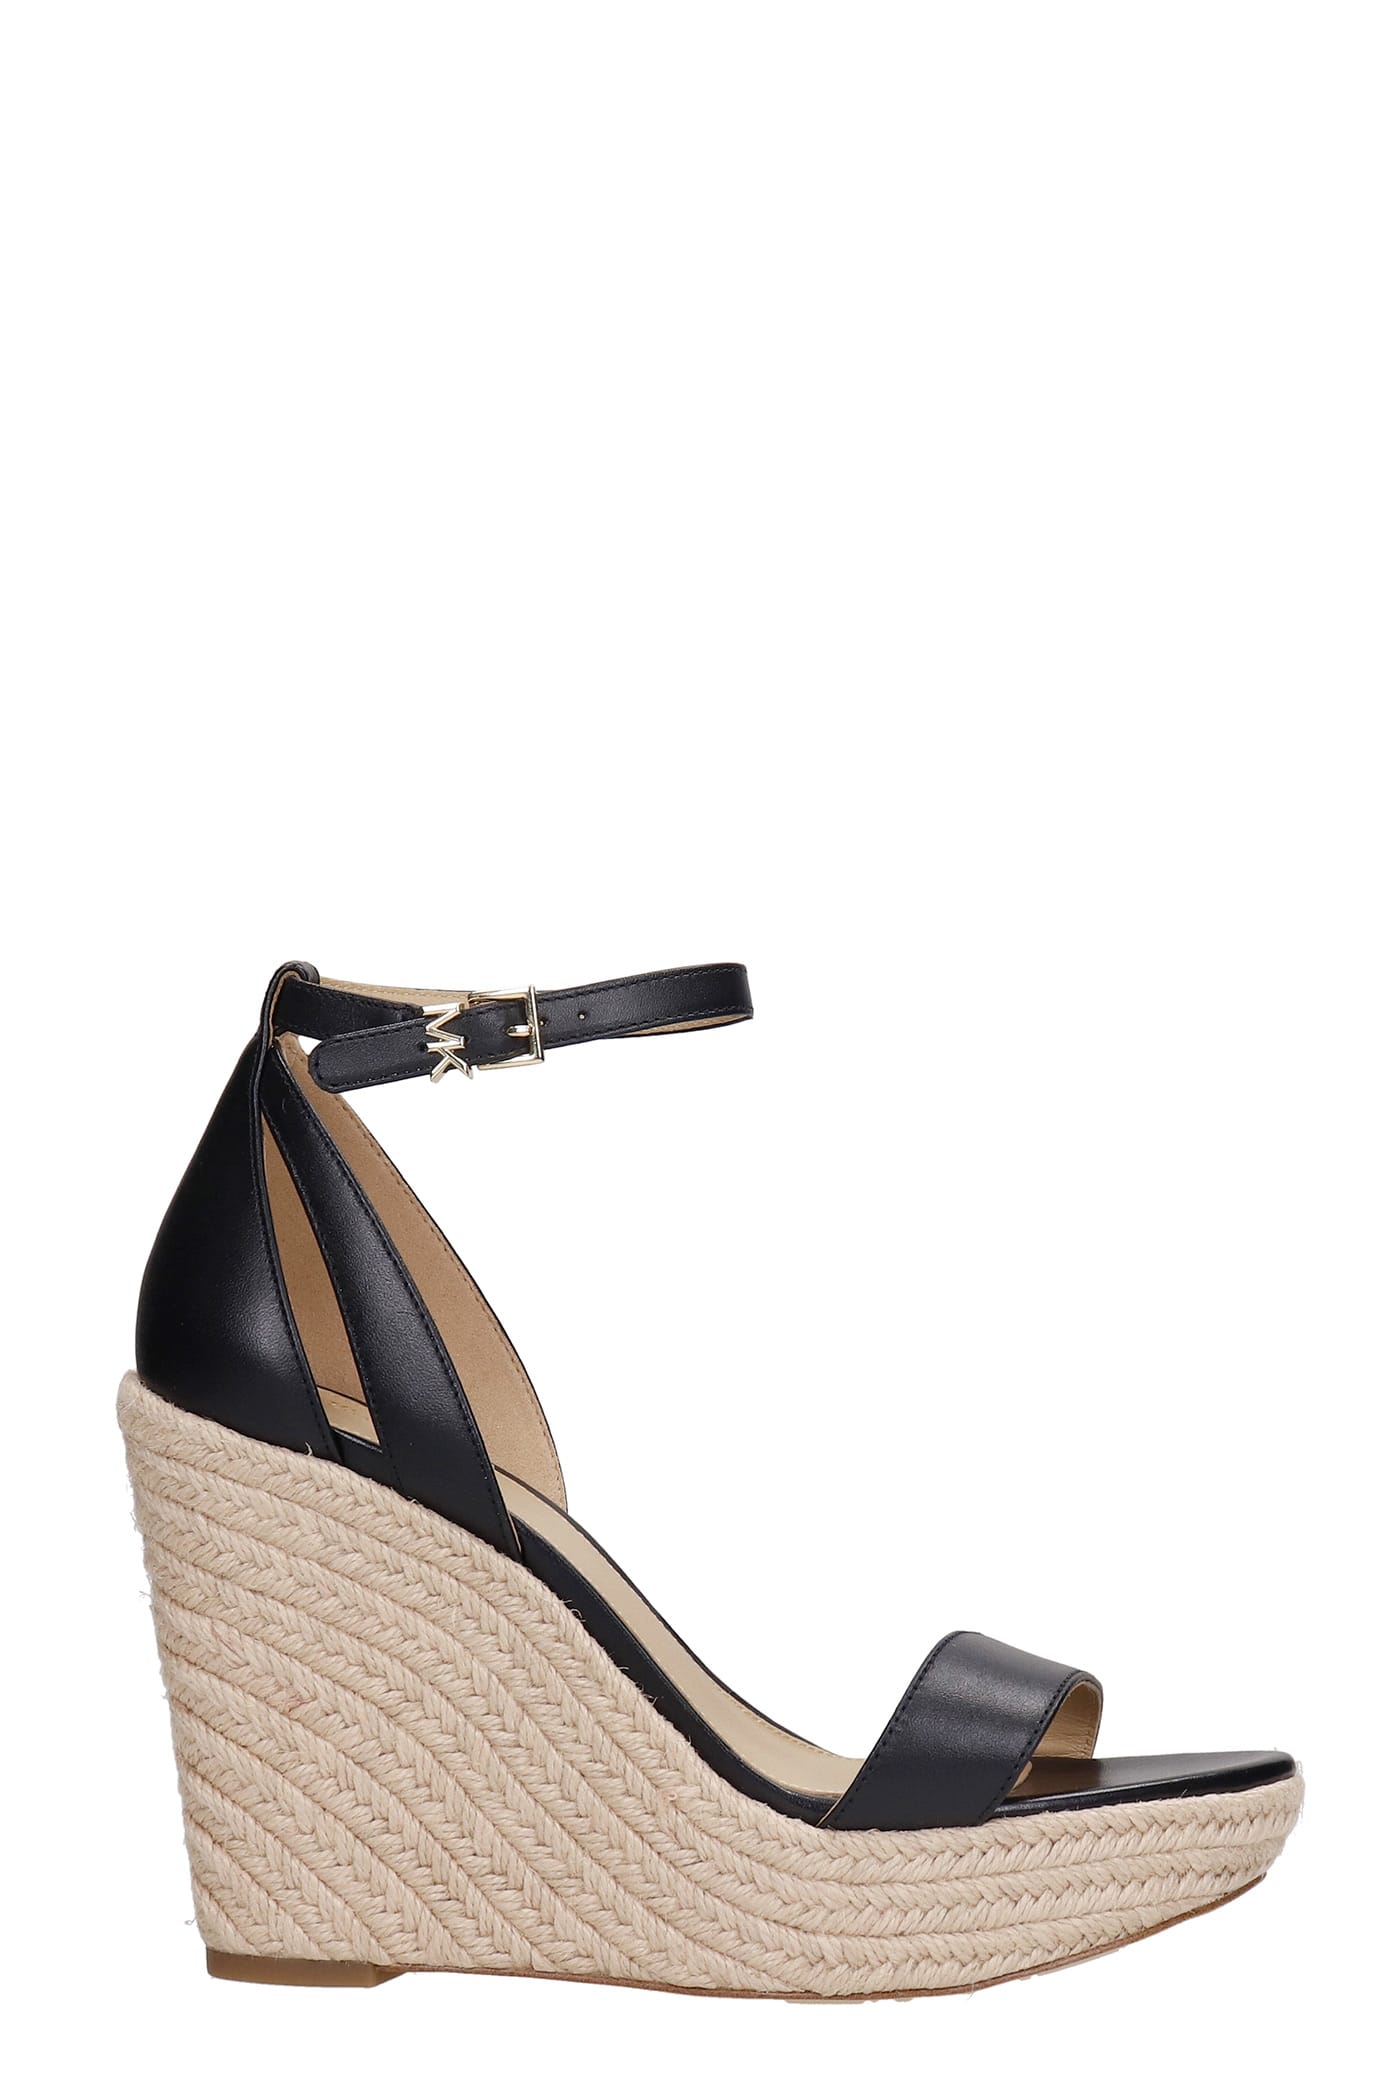 Michael Kors Kimberly Wedges In Black Leather